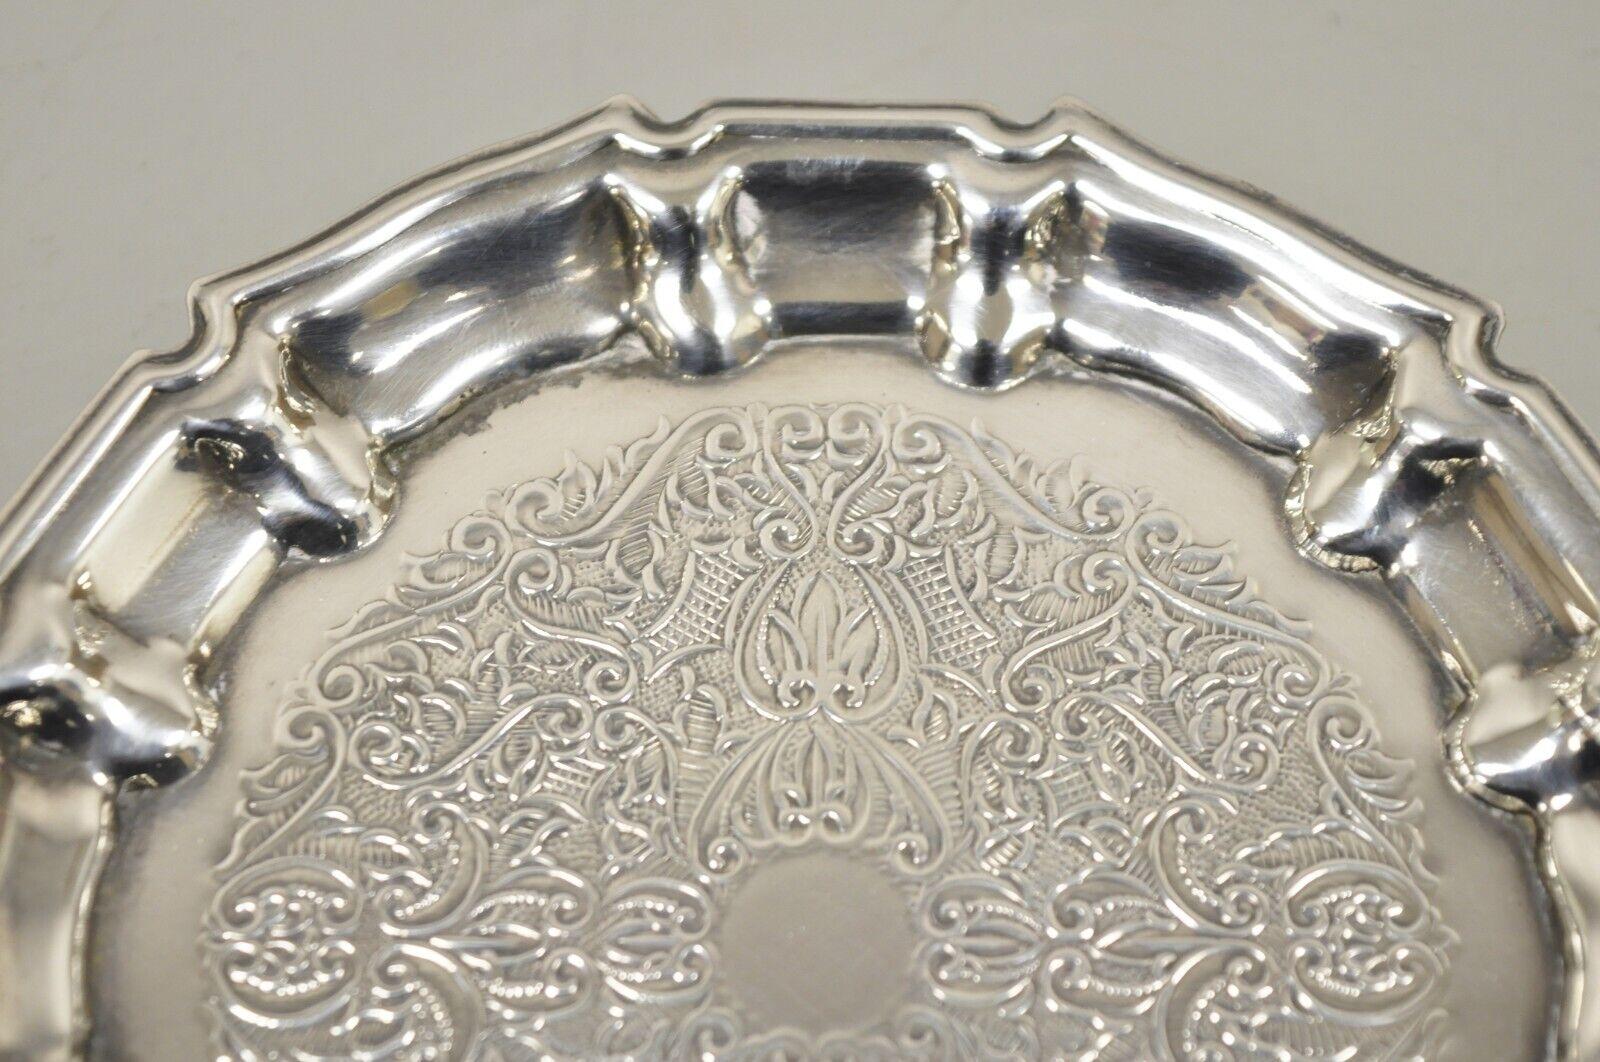 Frank Hawker England Silverplate Ornate Wine Coaster Tray Dish, Set of 6 In Good Condition For Sale In Philadelphia, PA